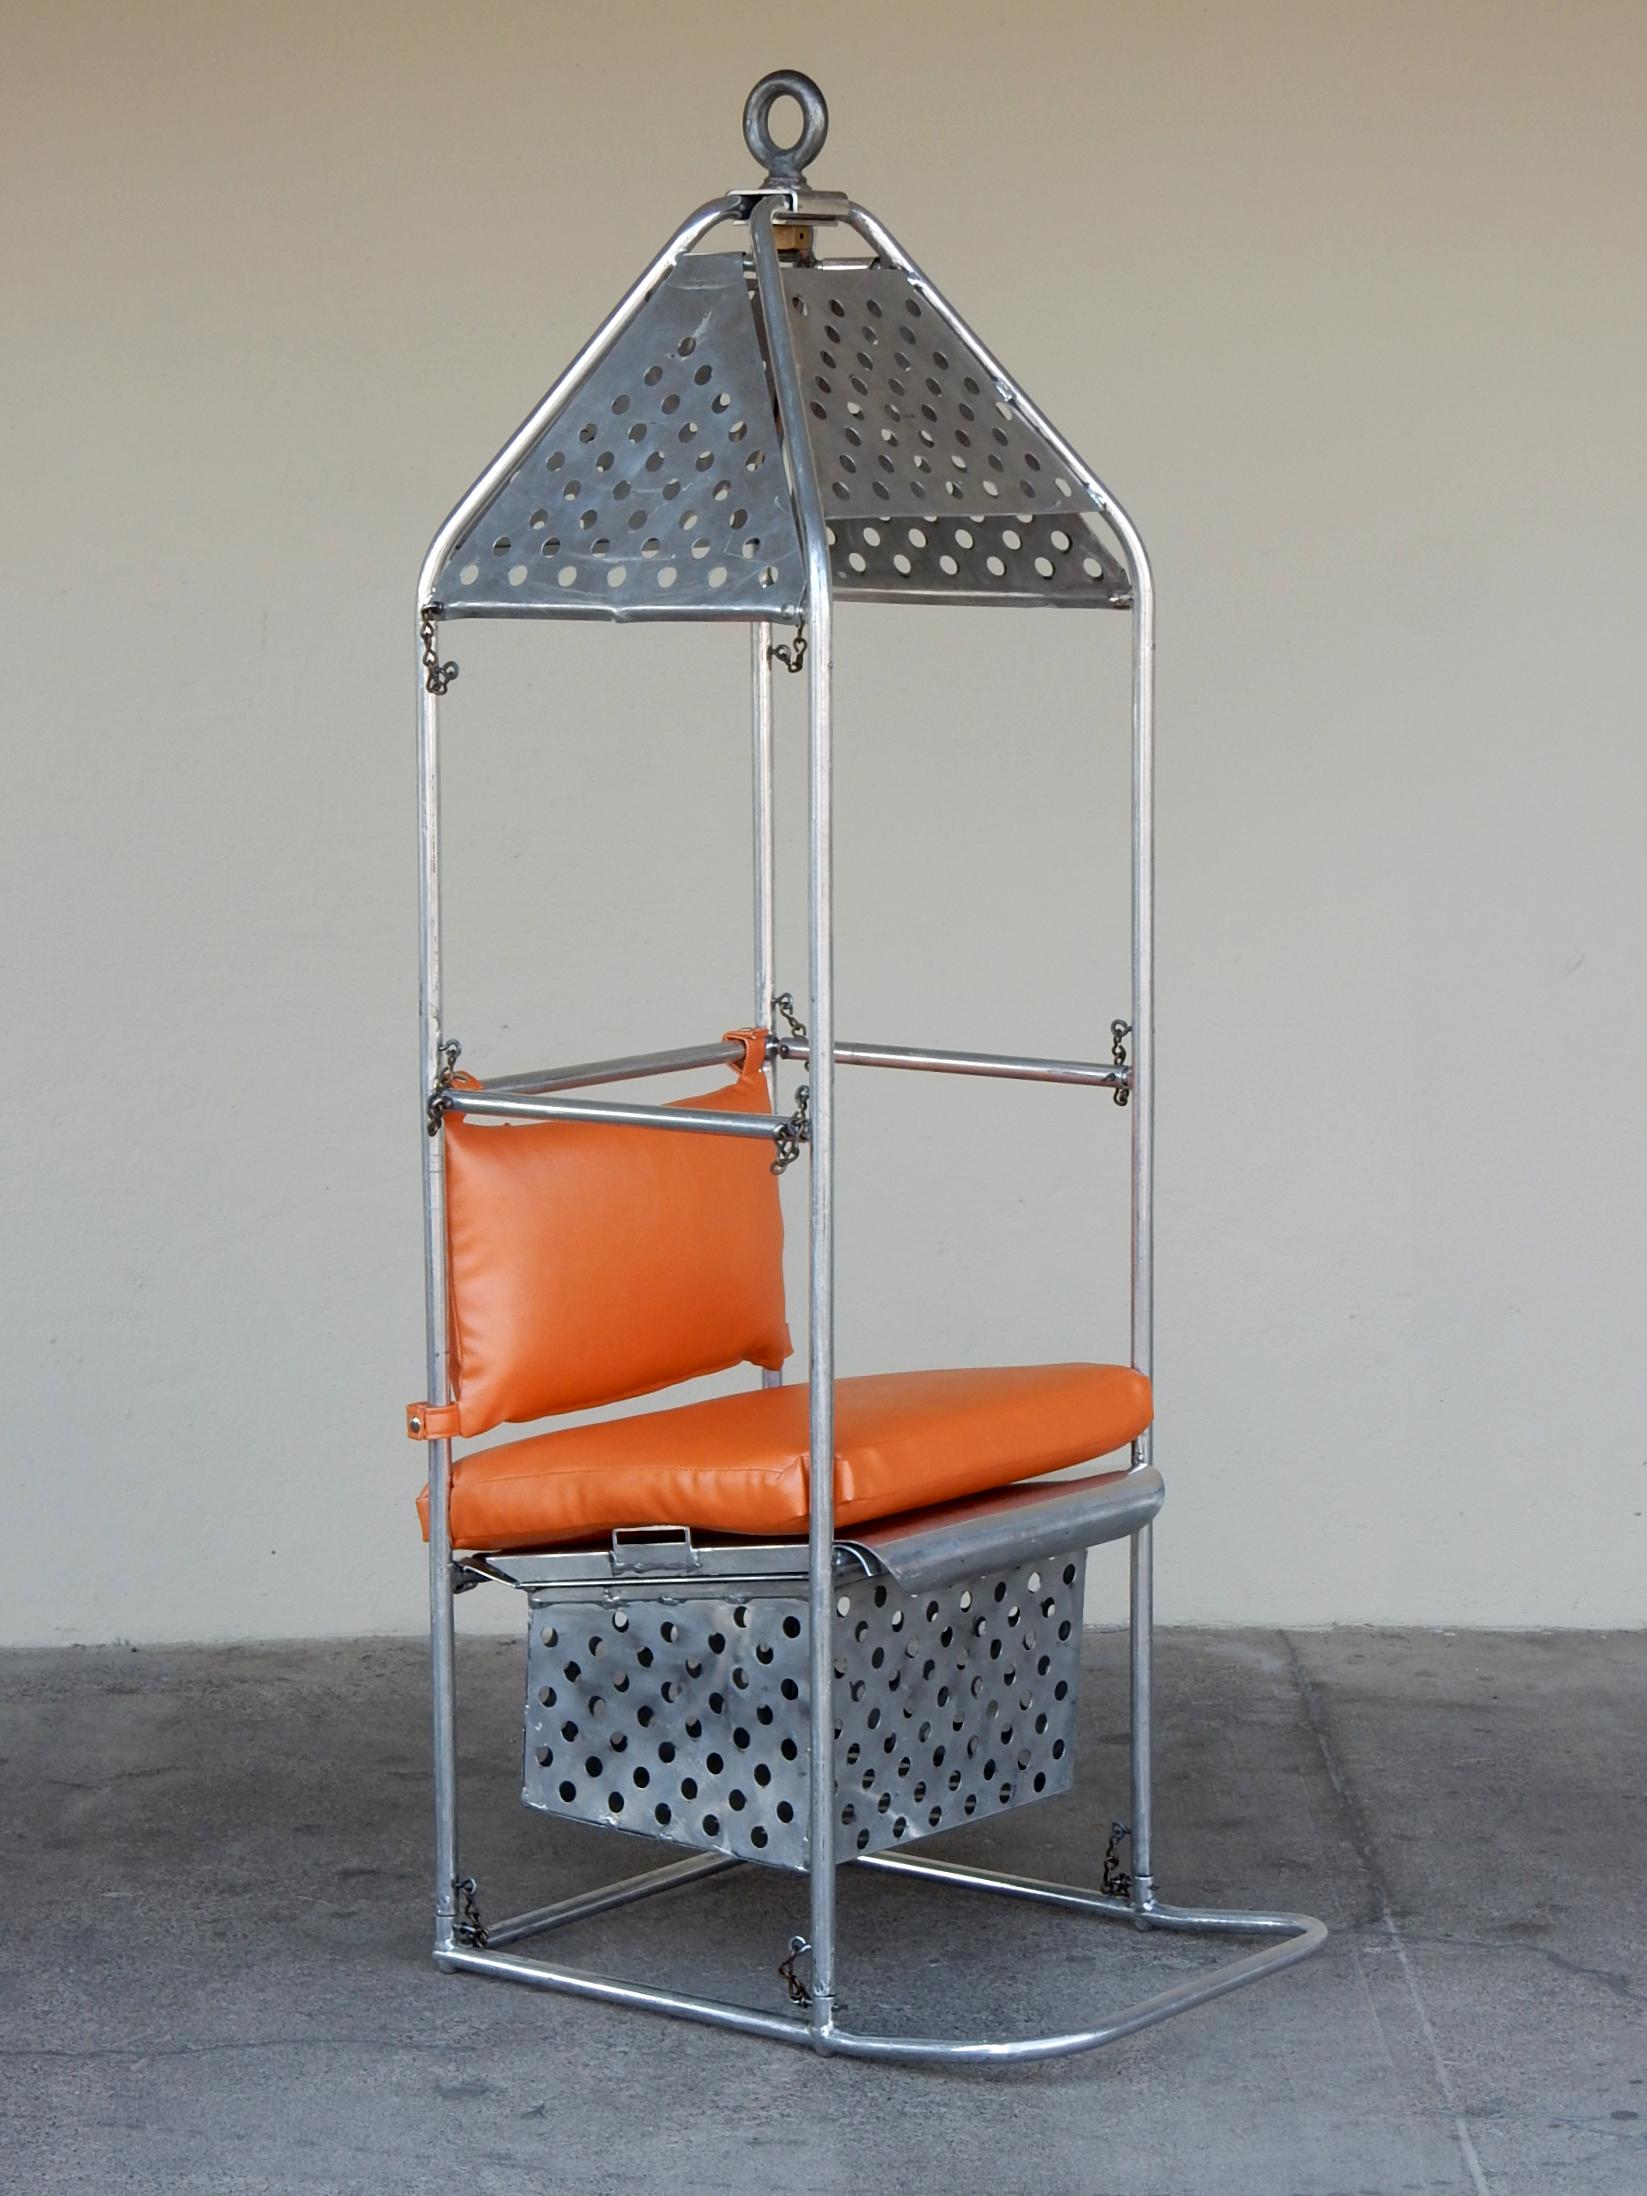 1950s Industrial Aluminum Crane or Airplane Hoist Canopy Chair In Fair Condition For Sale In Las Vegas, NV